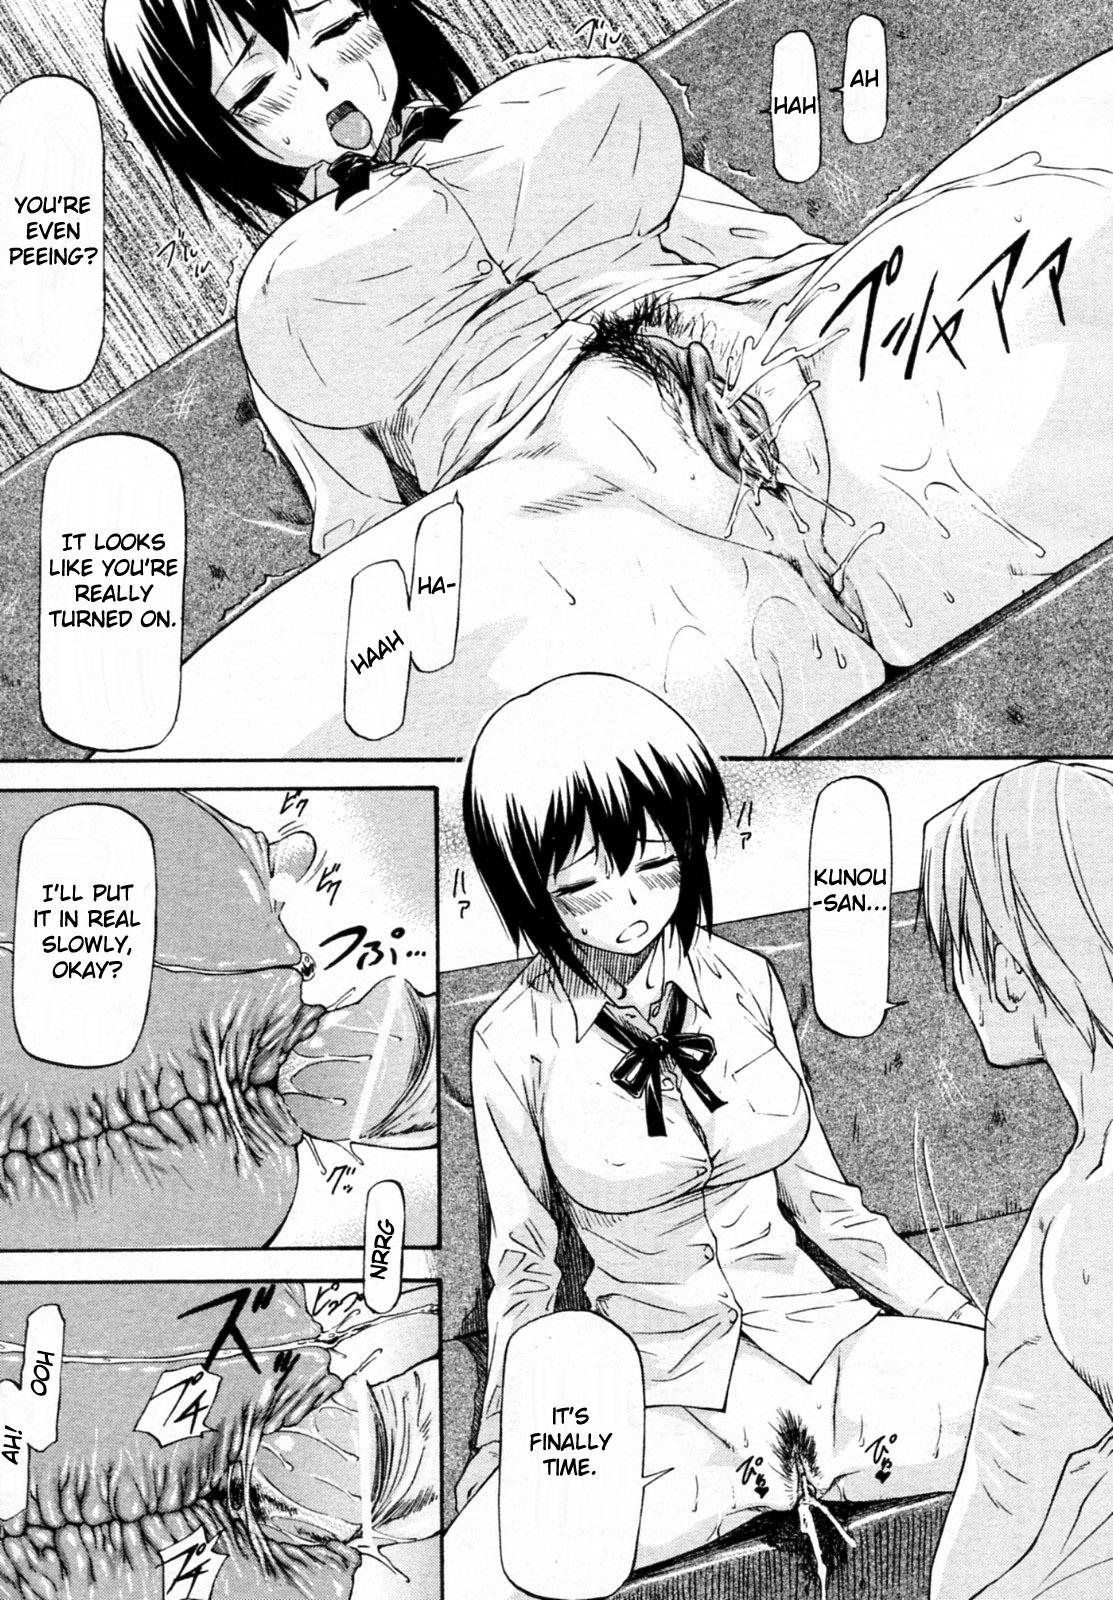 [Nagare Ippon] Meat Hole Ch.02-04,07-09 [English] 10